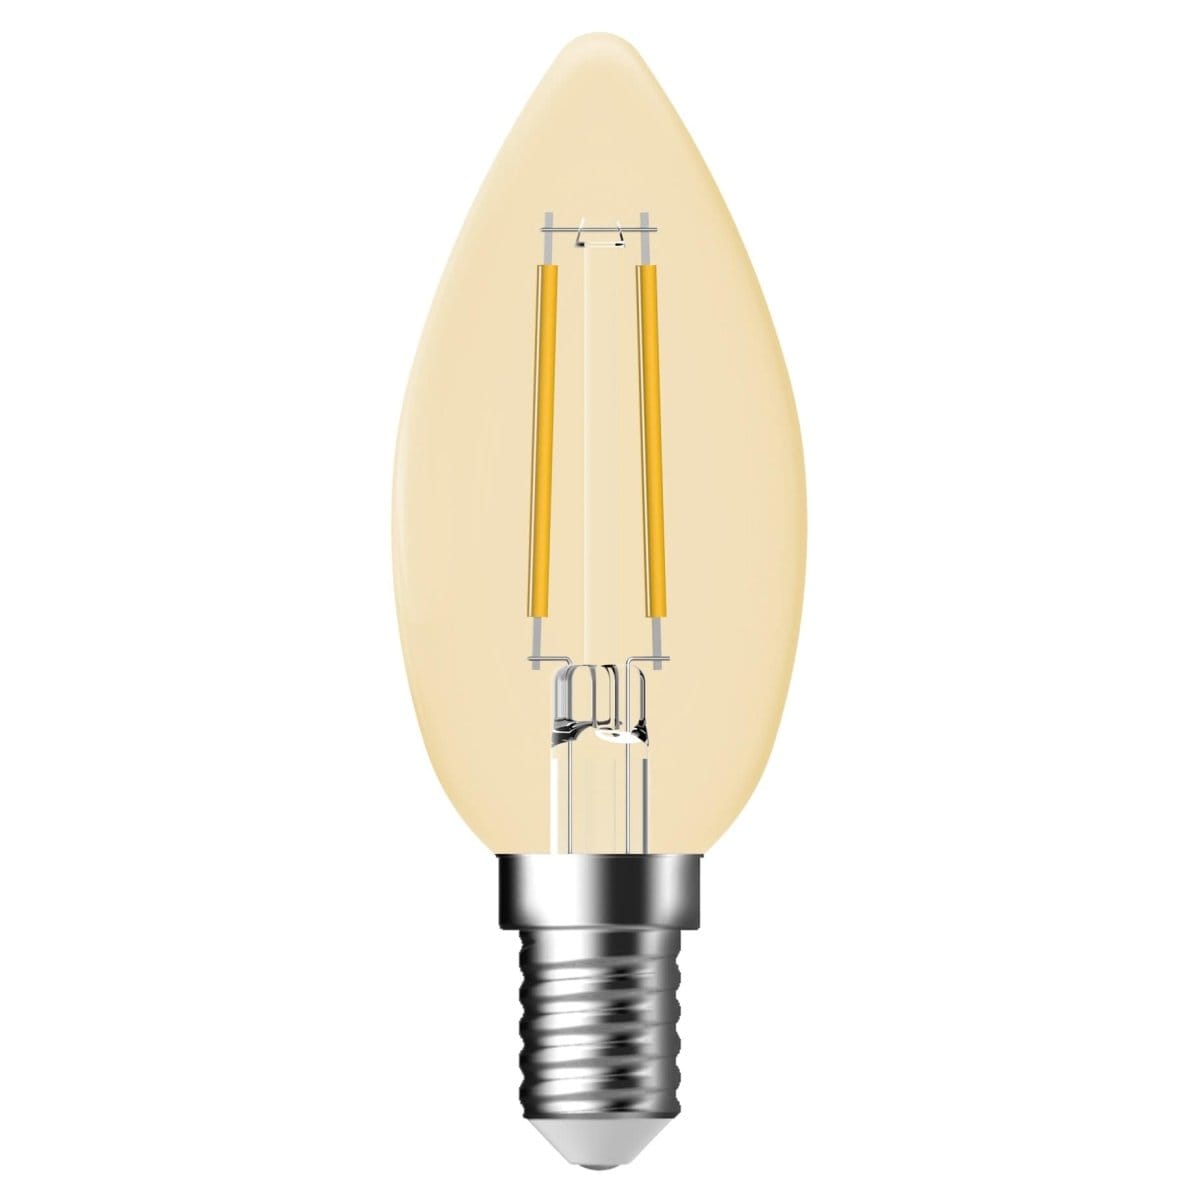 Heavenly Chandeliers Light Bulbs E14 Decorative Dimmable Light Bulb, with a golden glow